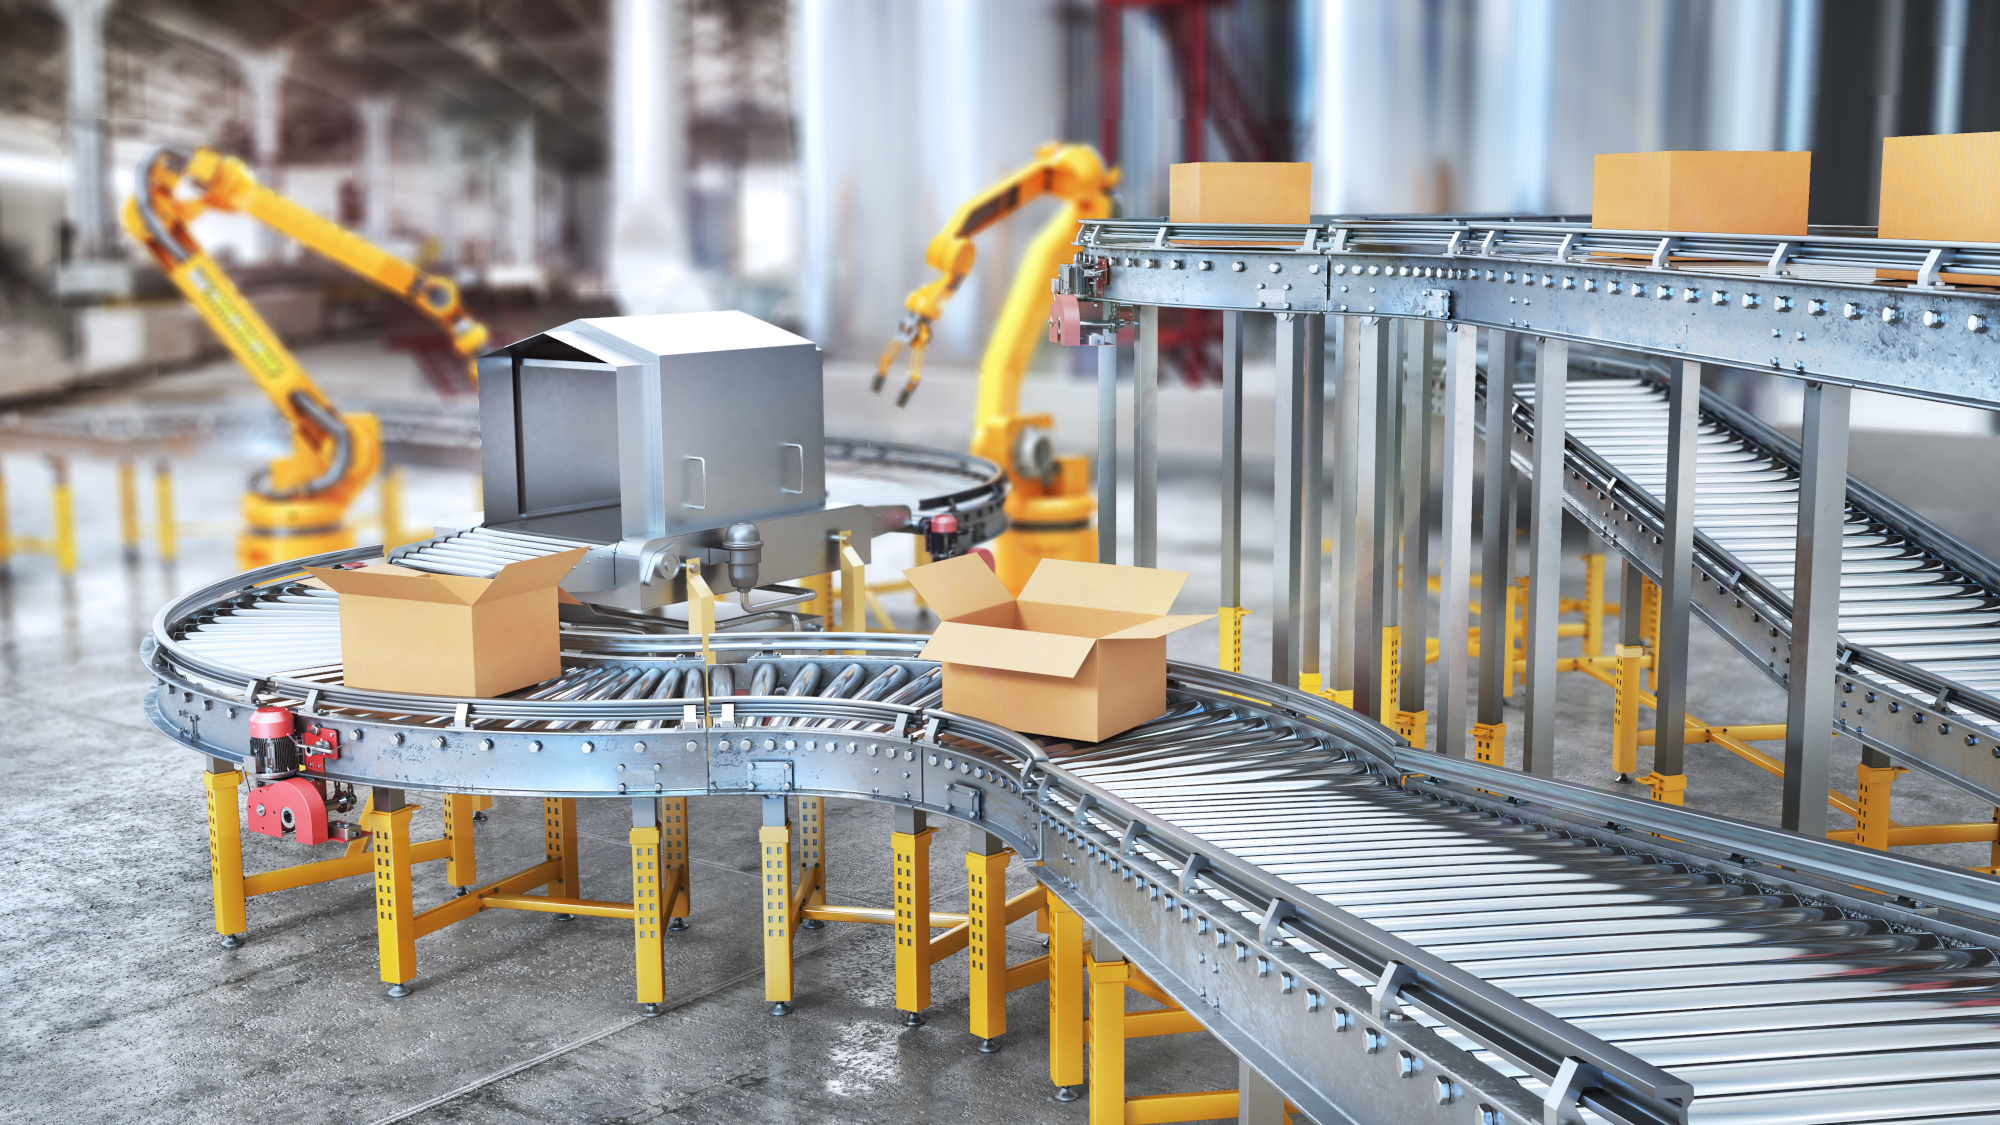 Robot arms grab items out of boxes moving on conveyor system